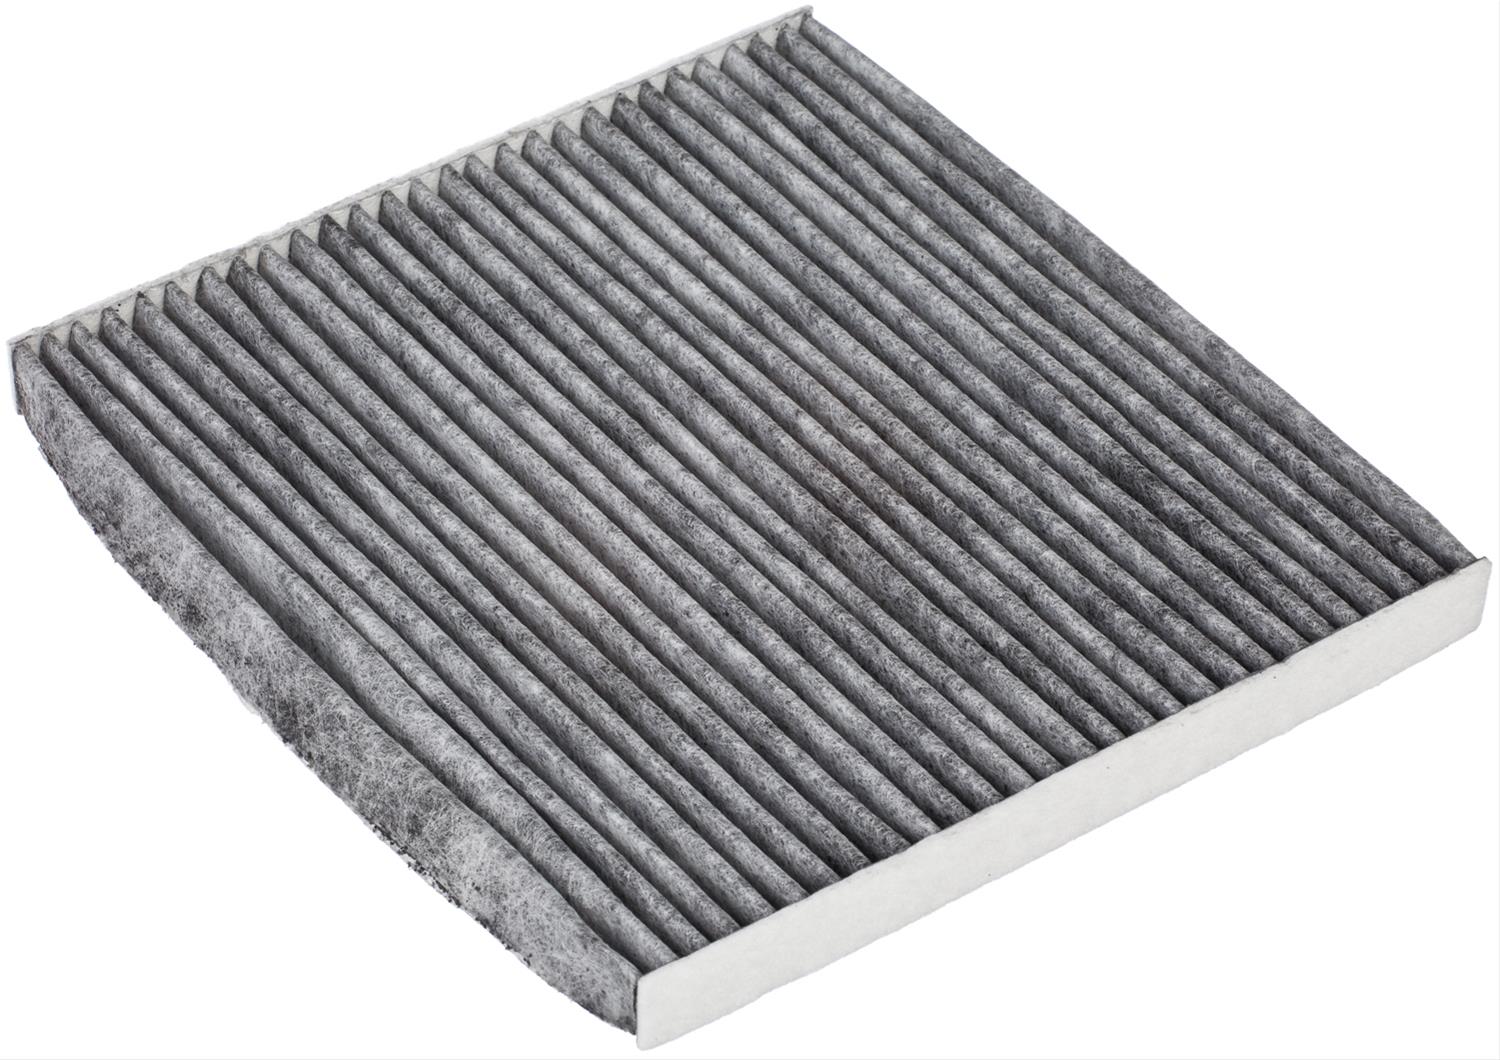 Find the best auto part for your vehicle: Shop for the perfect fitment ATP Professional activated carbon cabin air filter for your vehicle with us at an affordable price.